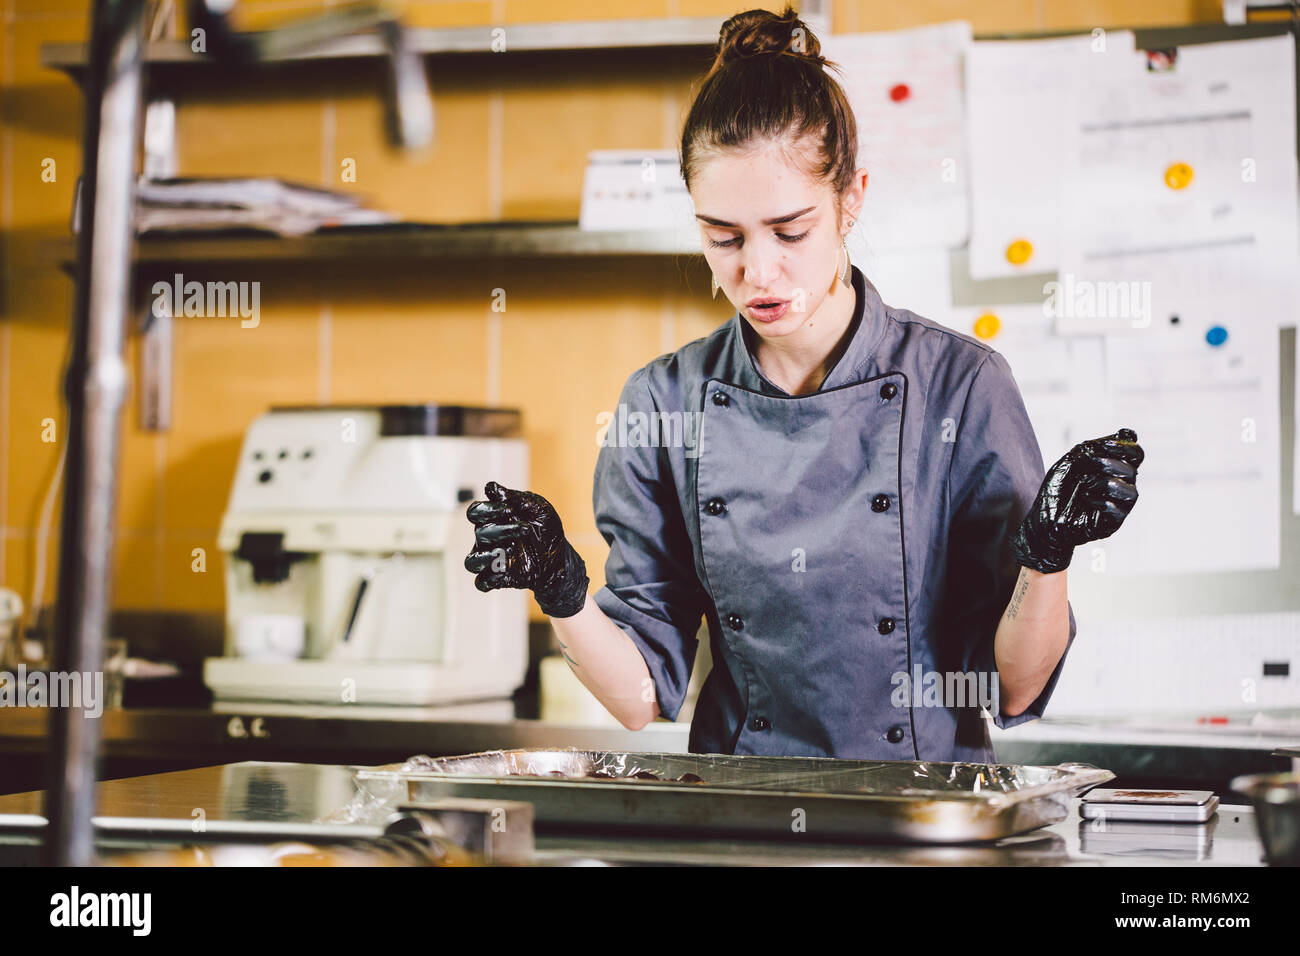 Subject profession and cooking pastry. young Caucasian woman with tattoo of  pastry chef in kitchen of restaurant preparing round chocolate candies han  Stock Photo - Alamy